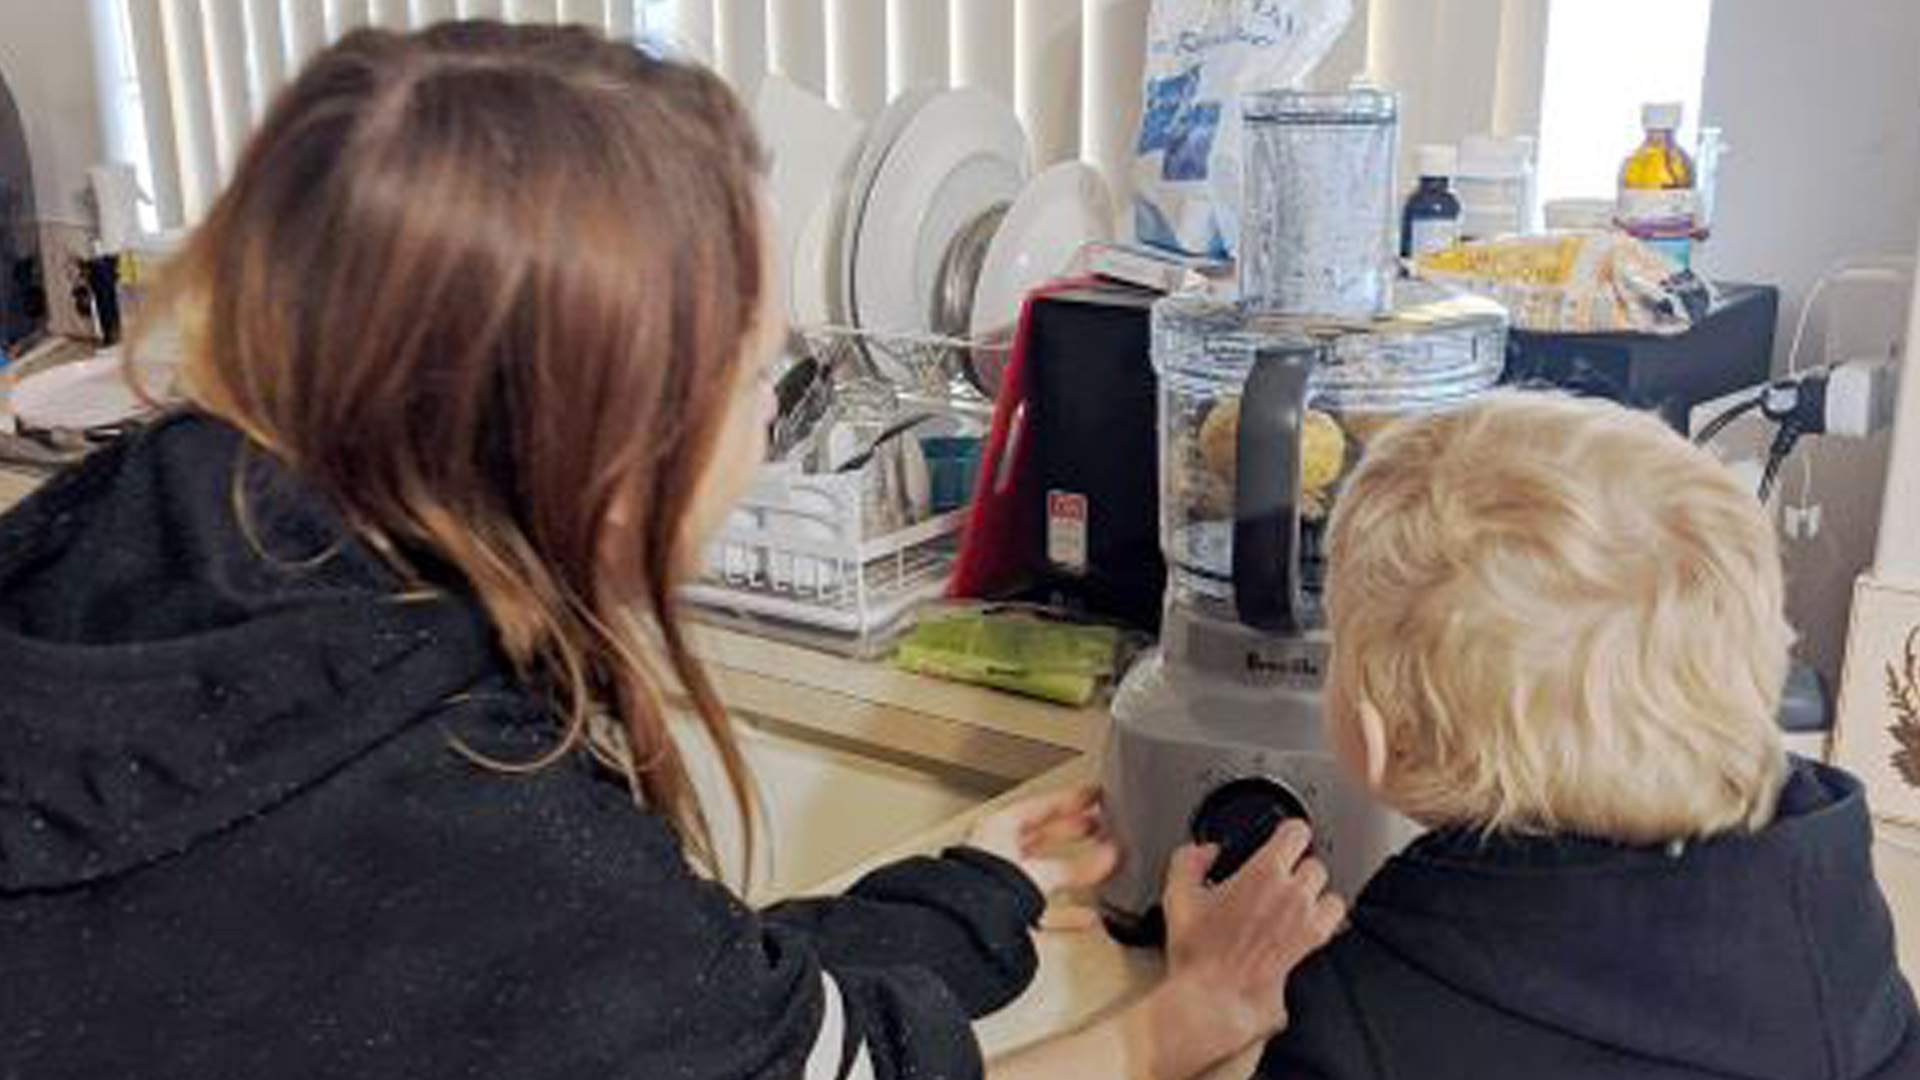 A woman and a young boy are leaning over a kitchen counter setting the dial on a kitchen wiz.